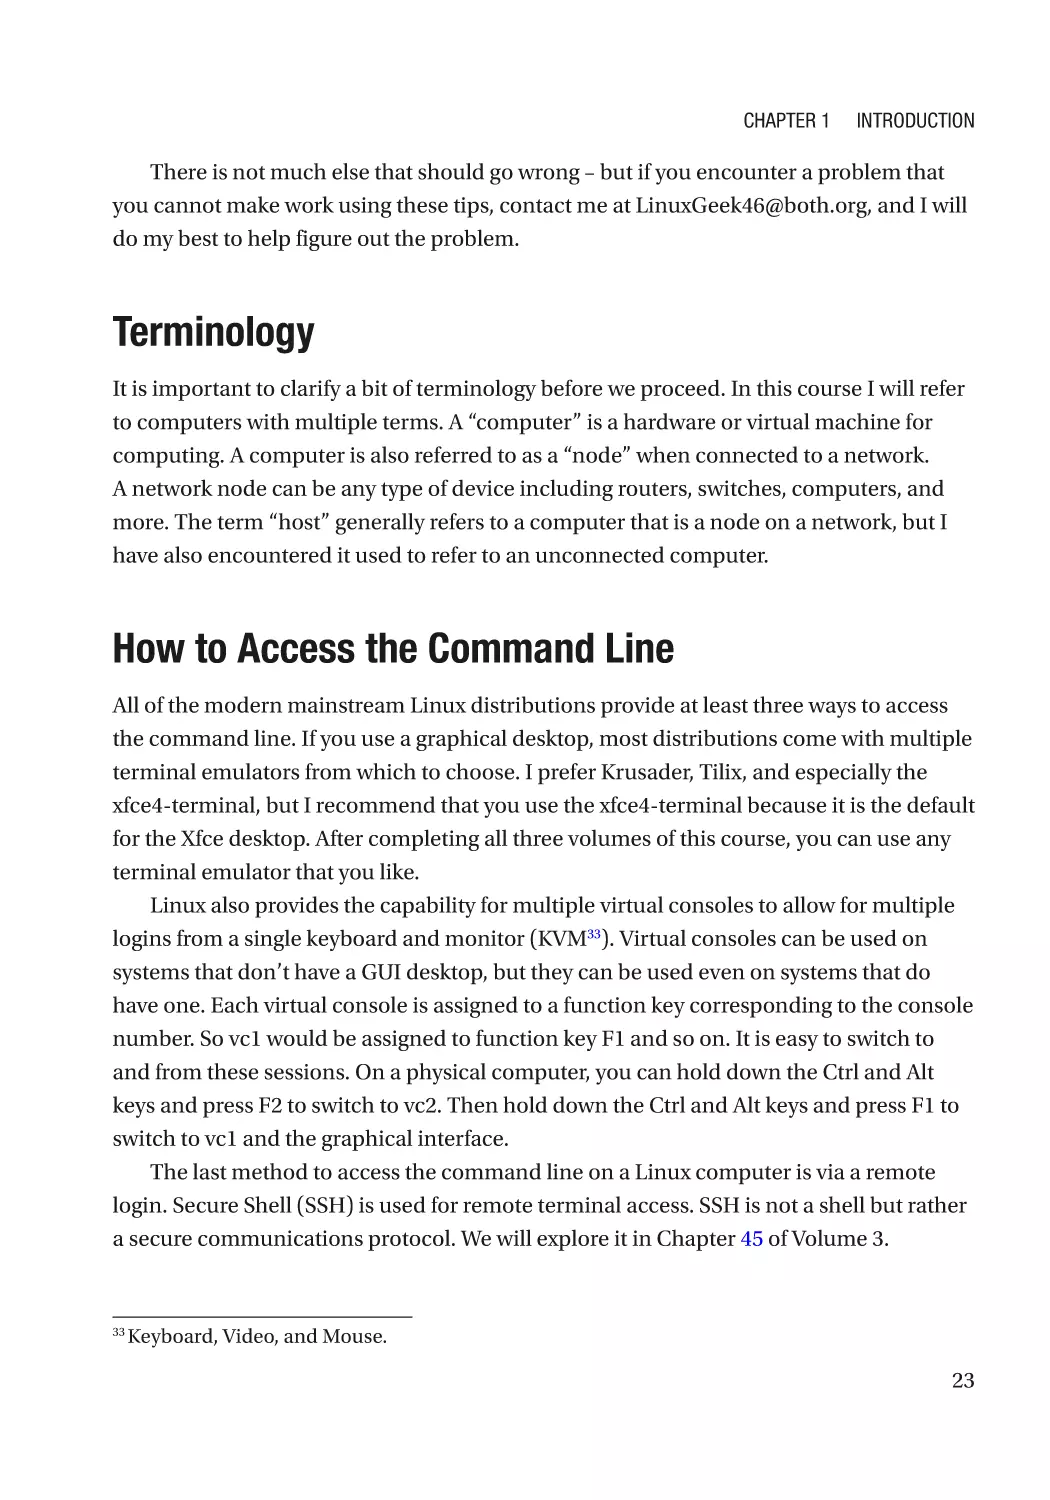 Terminology
How to Access the Command Line